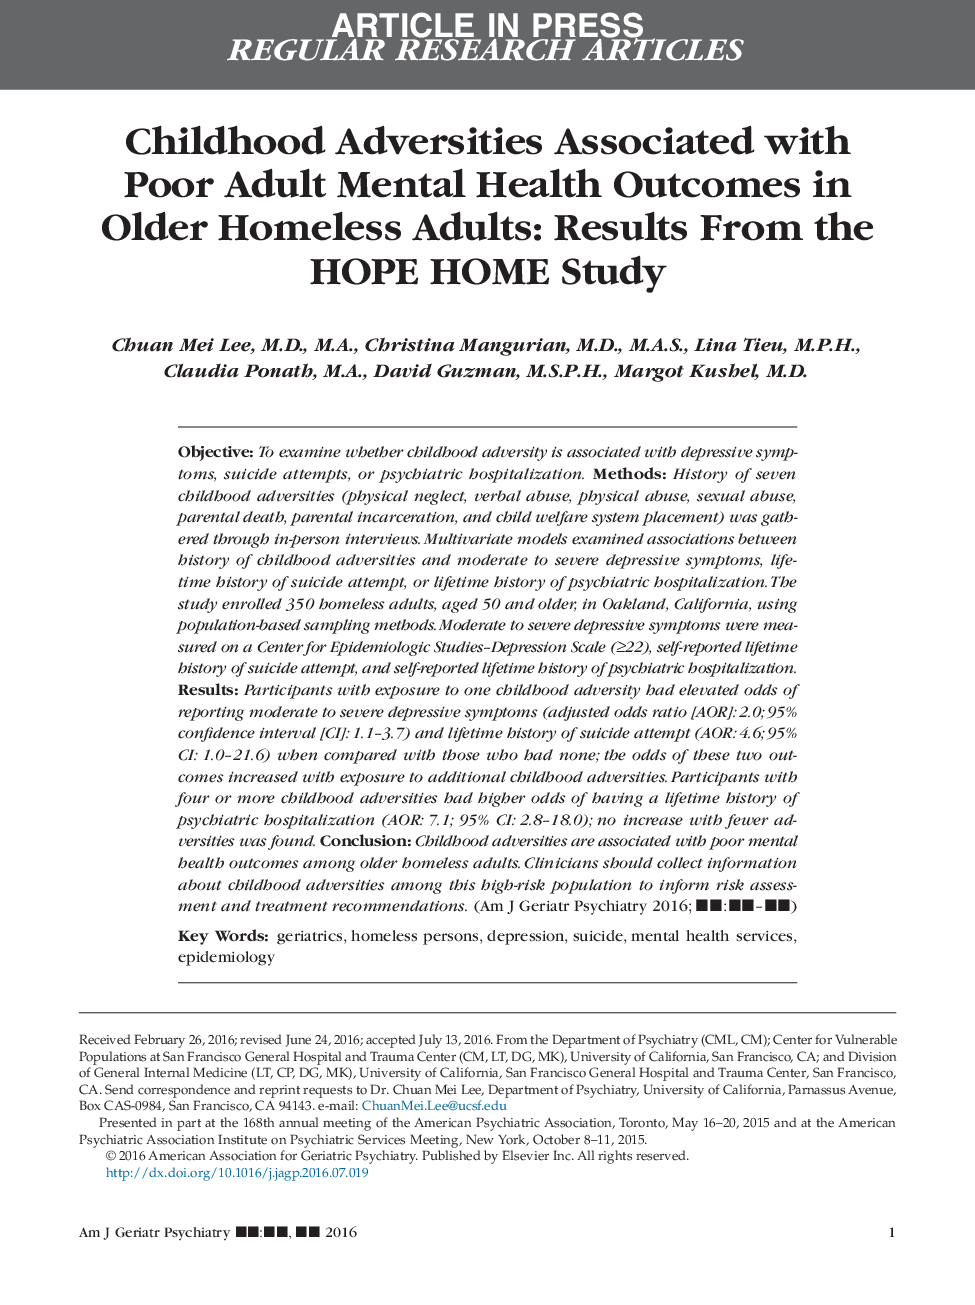 Childhood Adversities Associated with Poor Adult Mental Health Outcomes in Older Homeless Adults: Results From the HOPE HOME Study